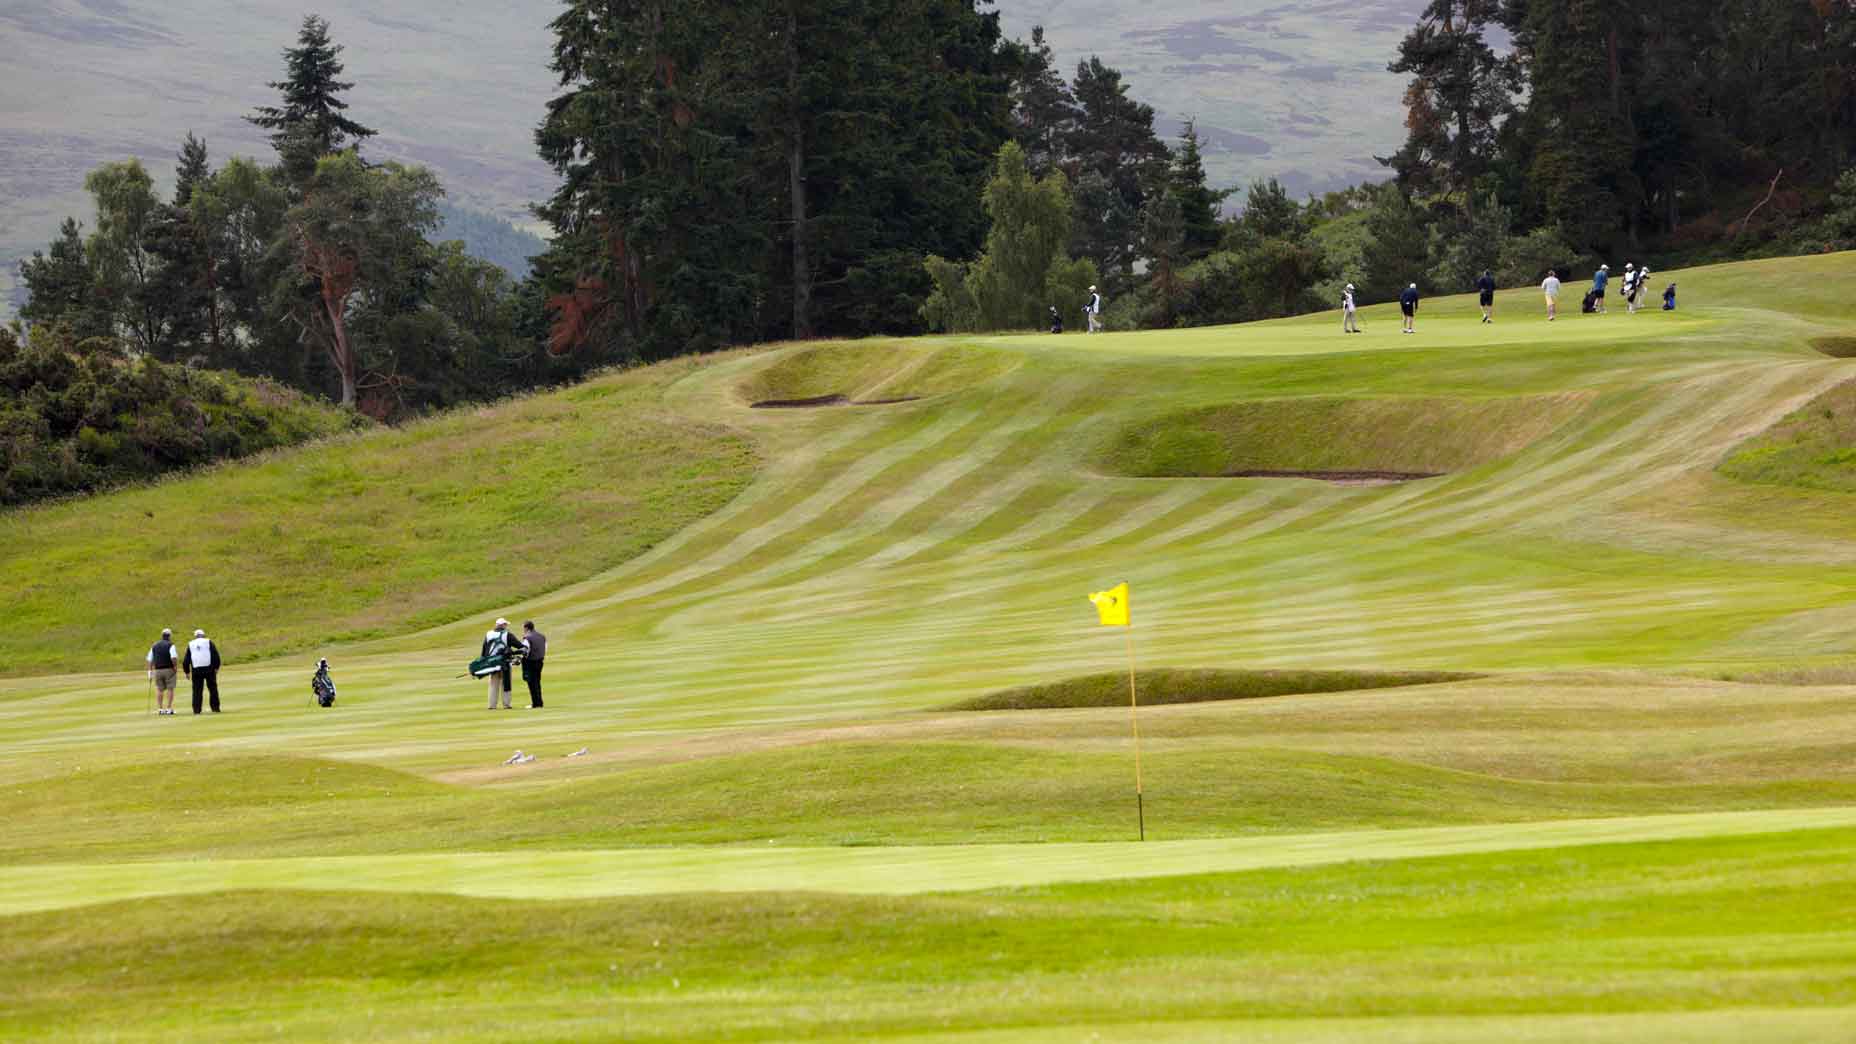 The Kings Course at Gleneagles, in Scotland.